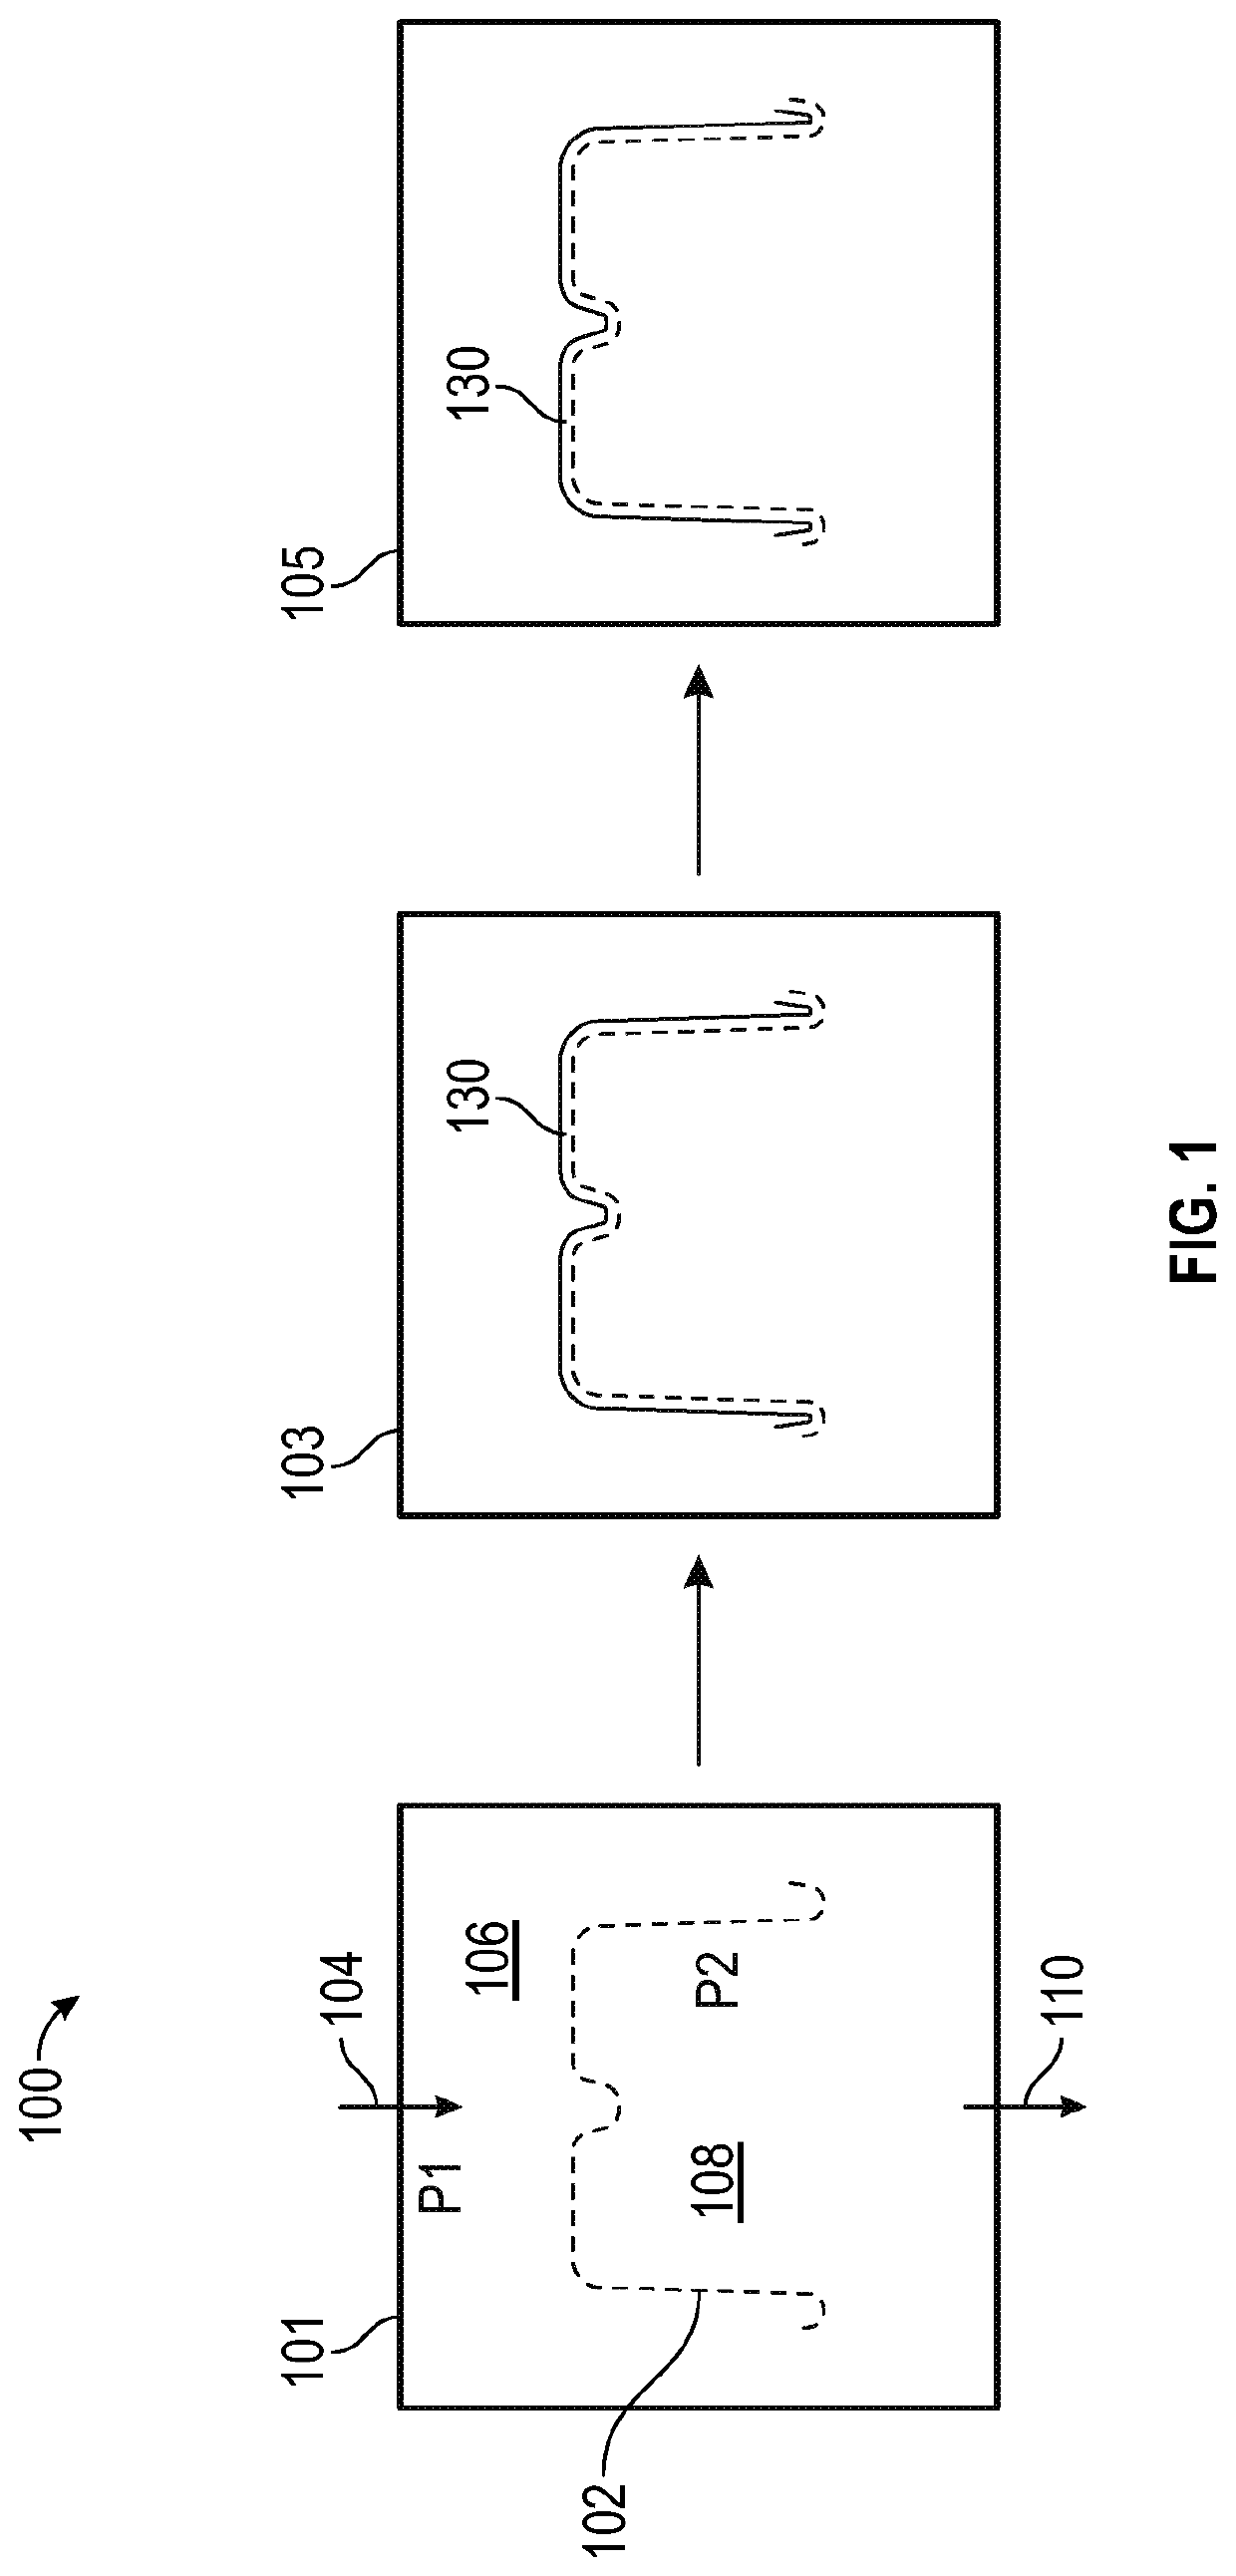 Methods and apparatus for manufacturing fiber-based meat containers